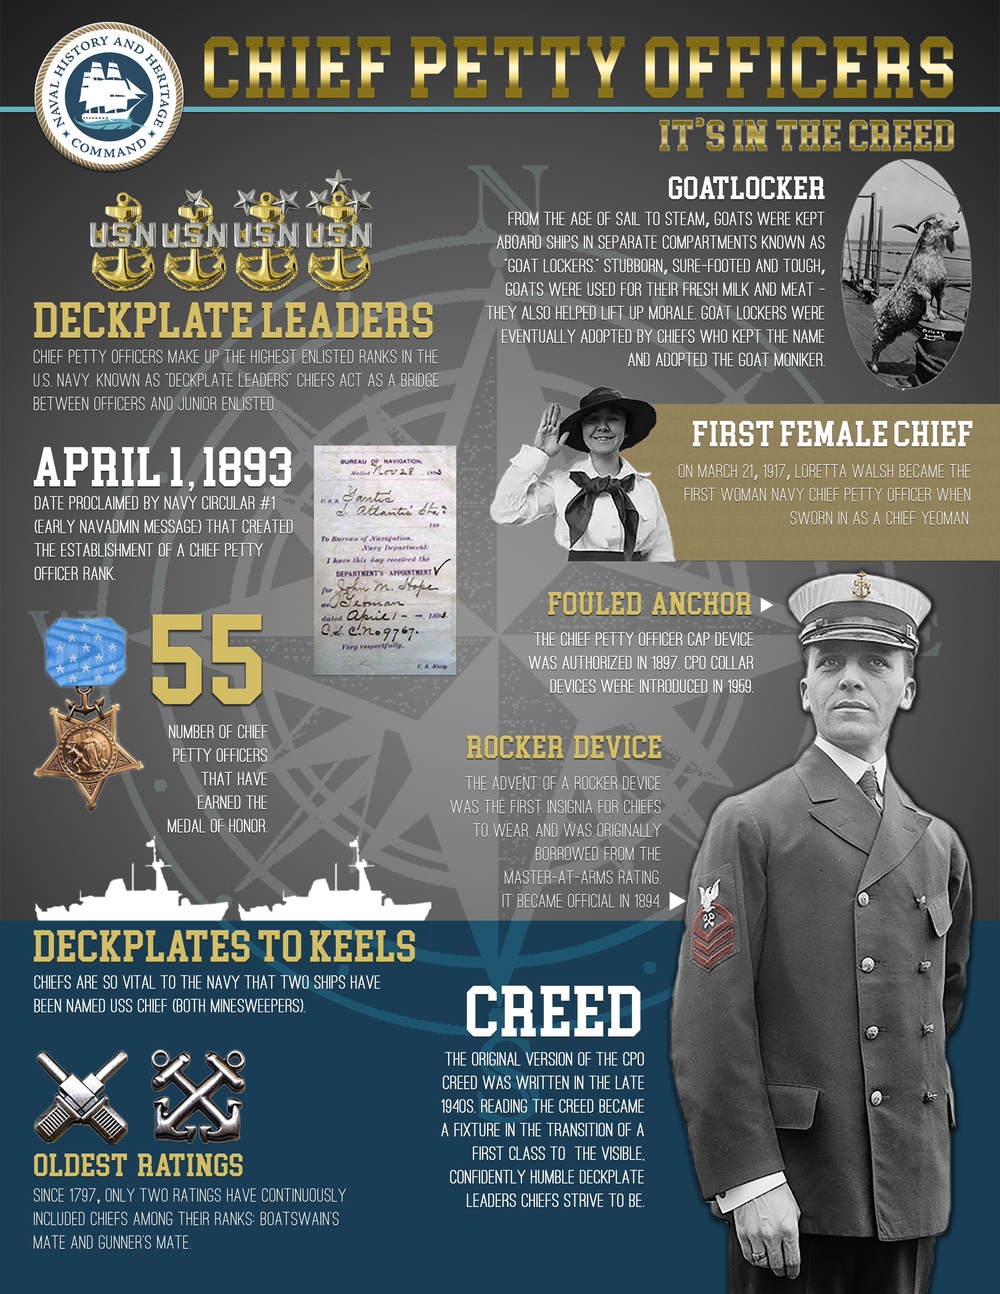 History of the Chief Petty Officer